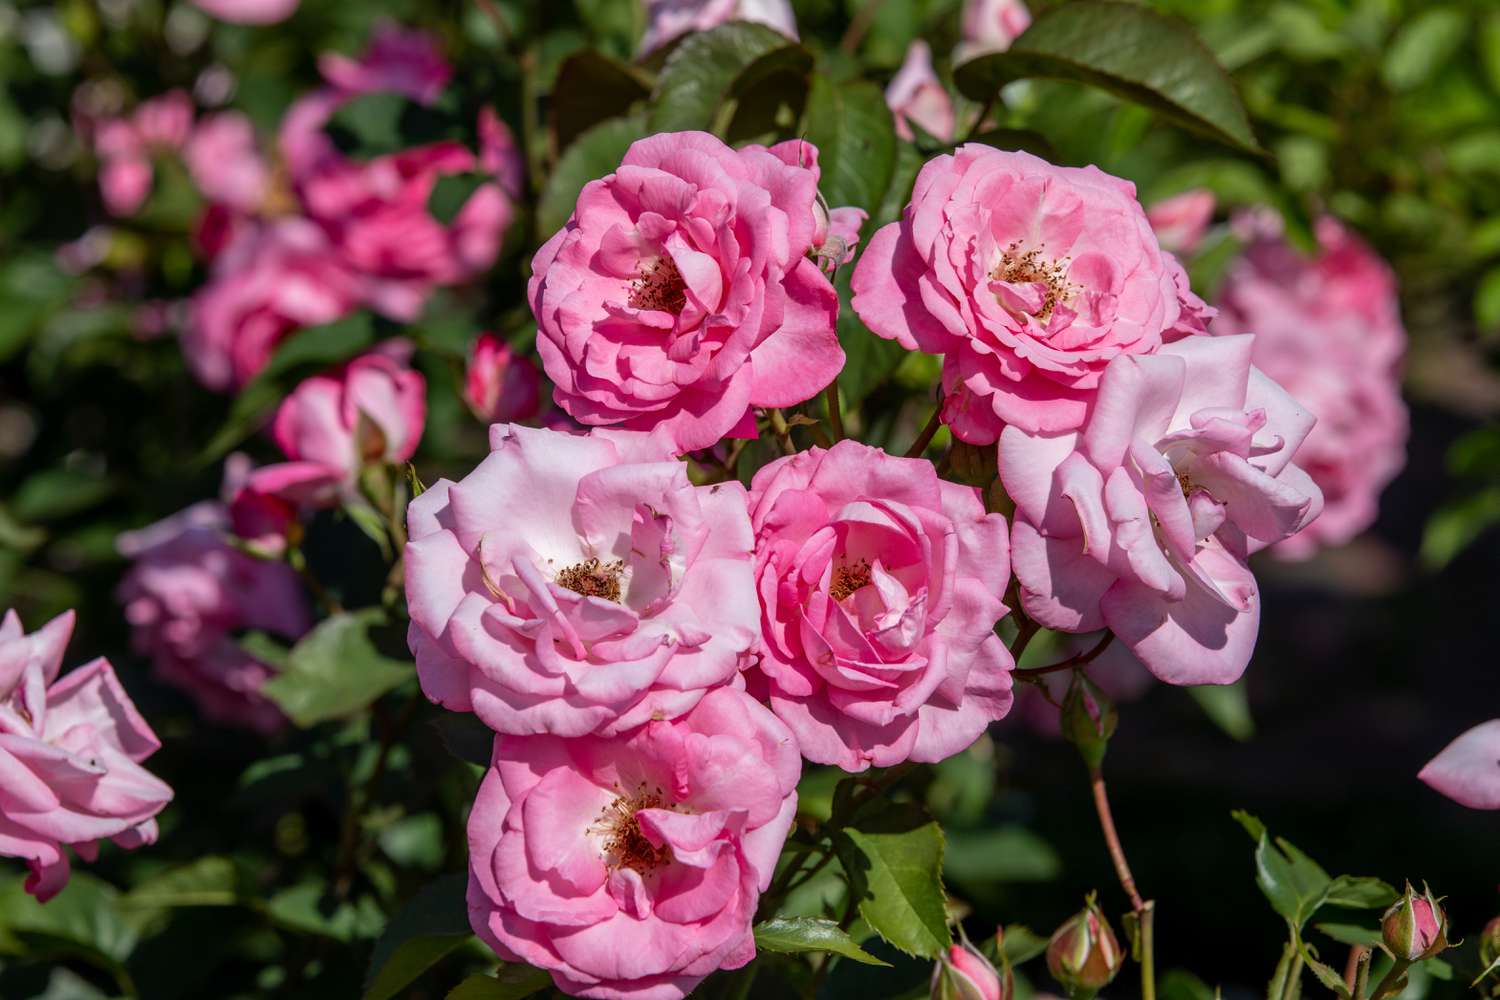 The Complete Guide to Caring for Rose Plants